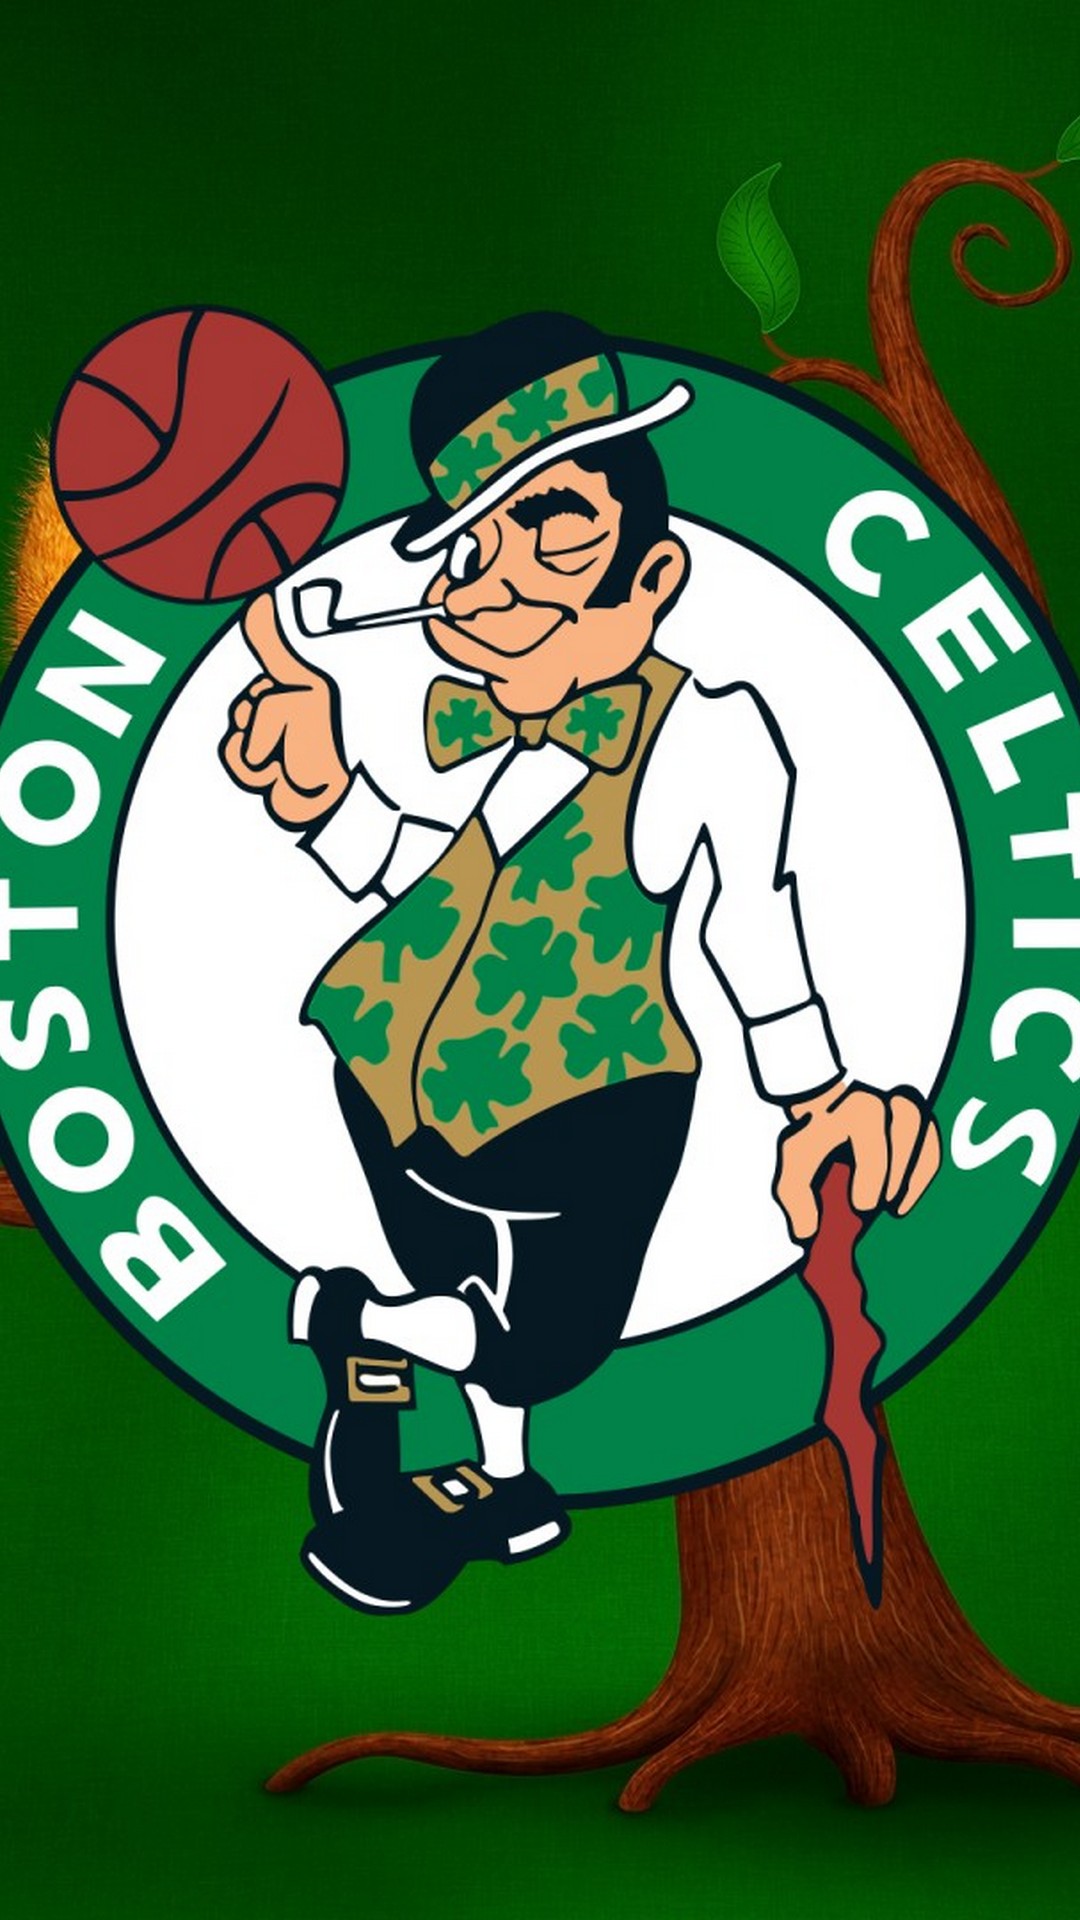 Wallpaper Boston Celtics Android with resolution 1080X1920 pixel. You can make this wallpaper for your Android backgrounds, Tablet, Smartphones Screensavers and Mobile Phone Lock Screen